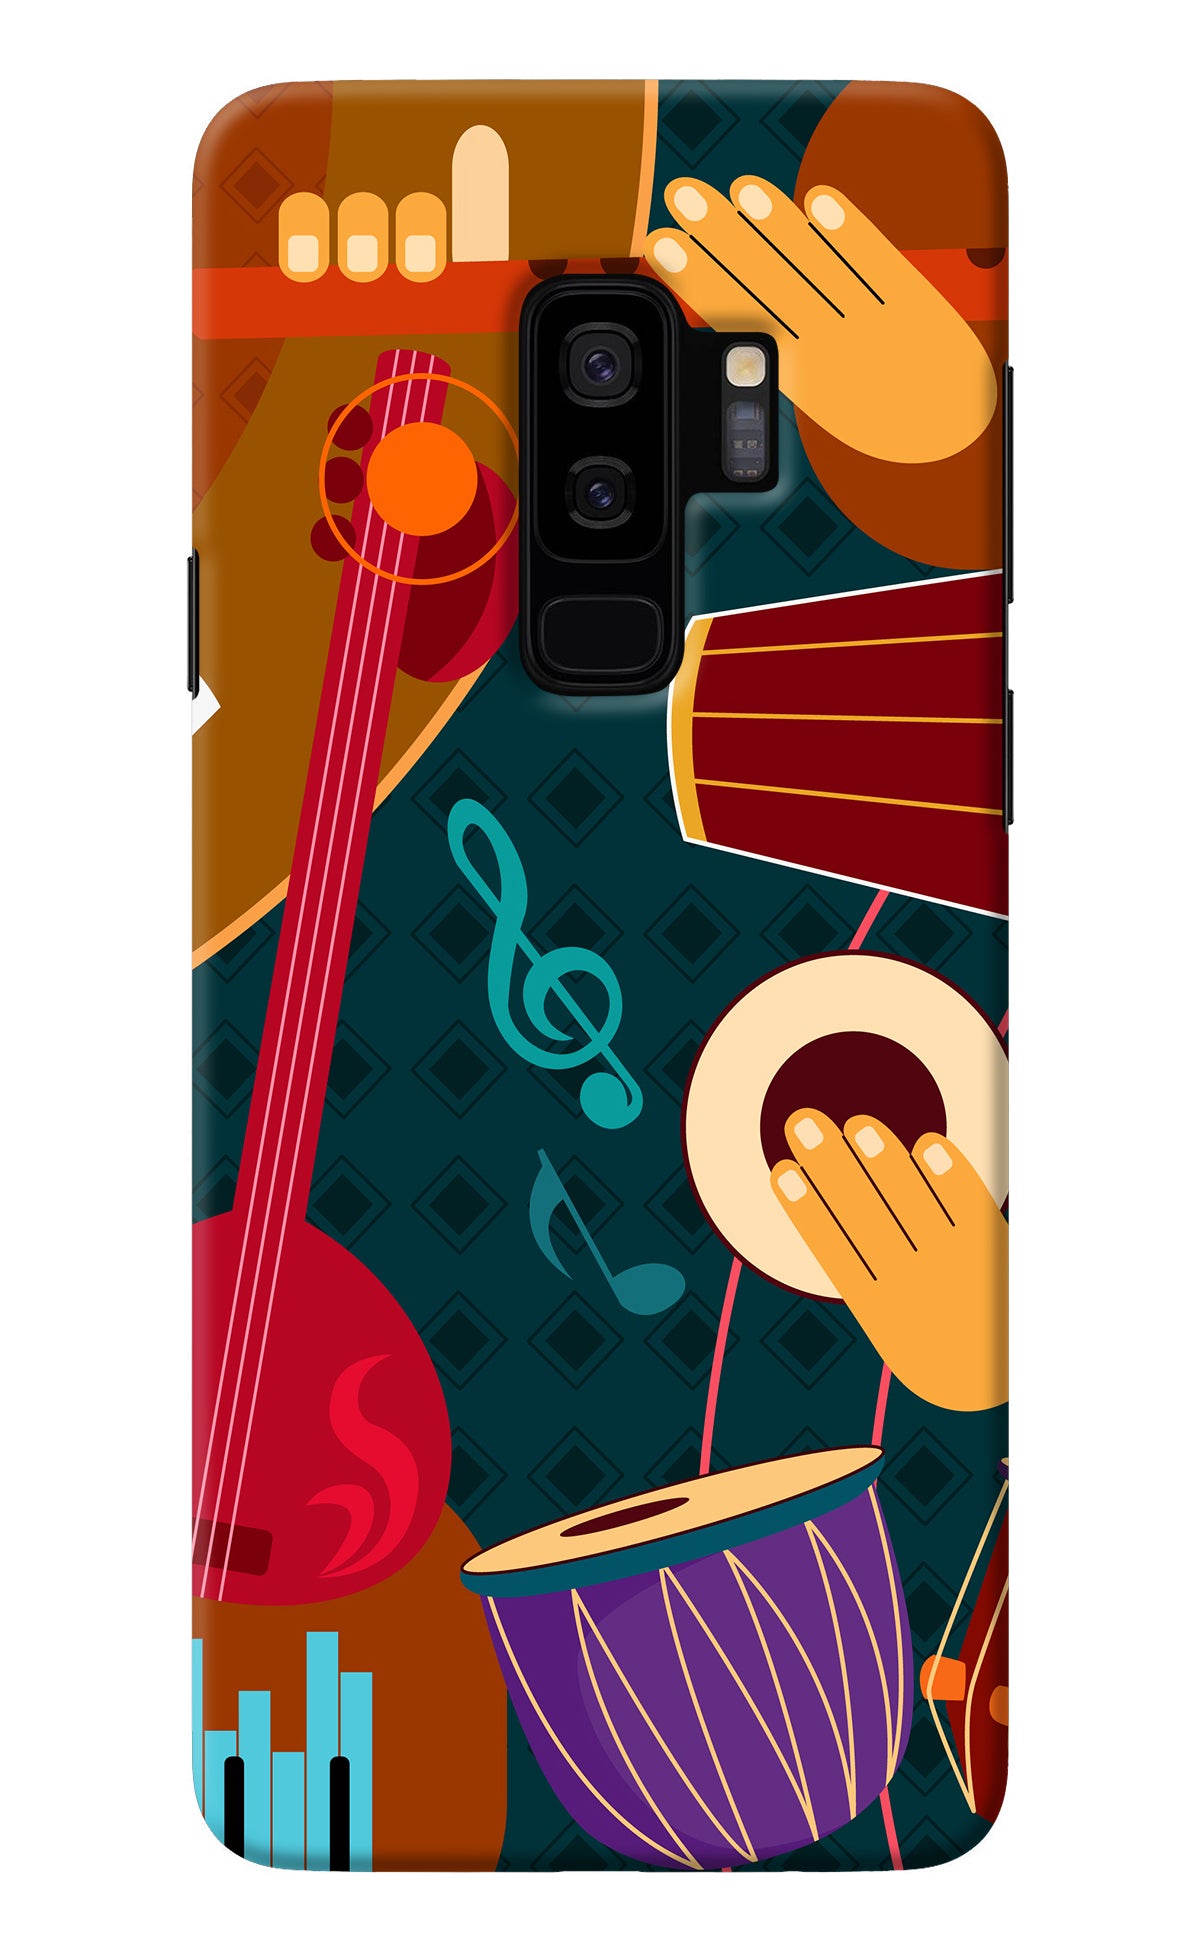 Music Instrument Samsung S9 Plus Back Cover